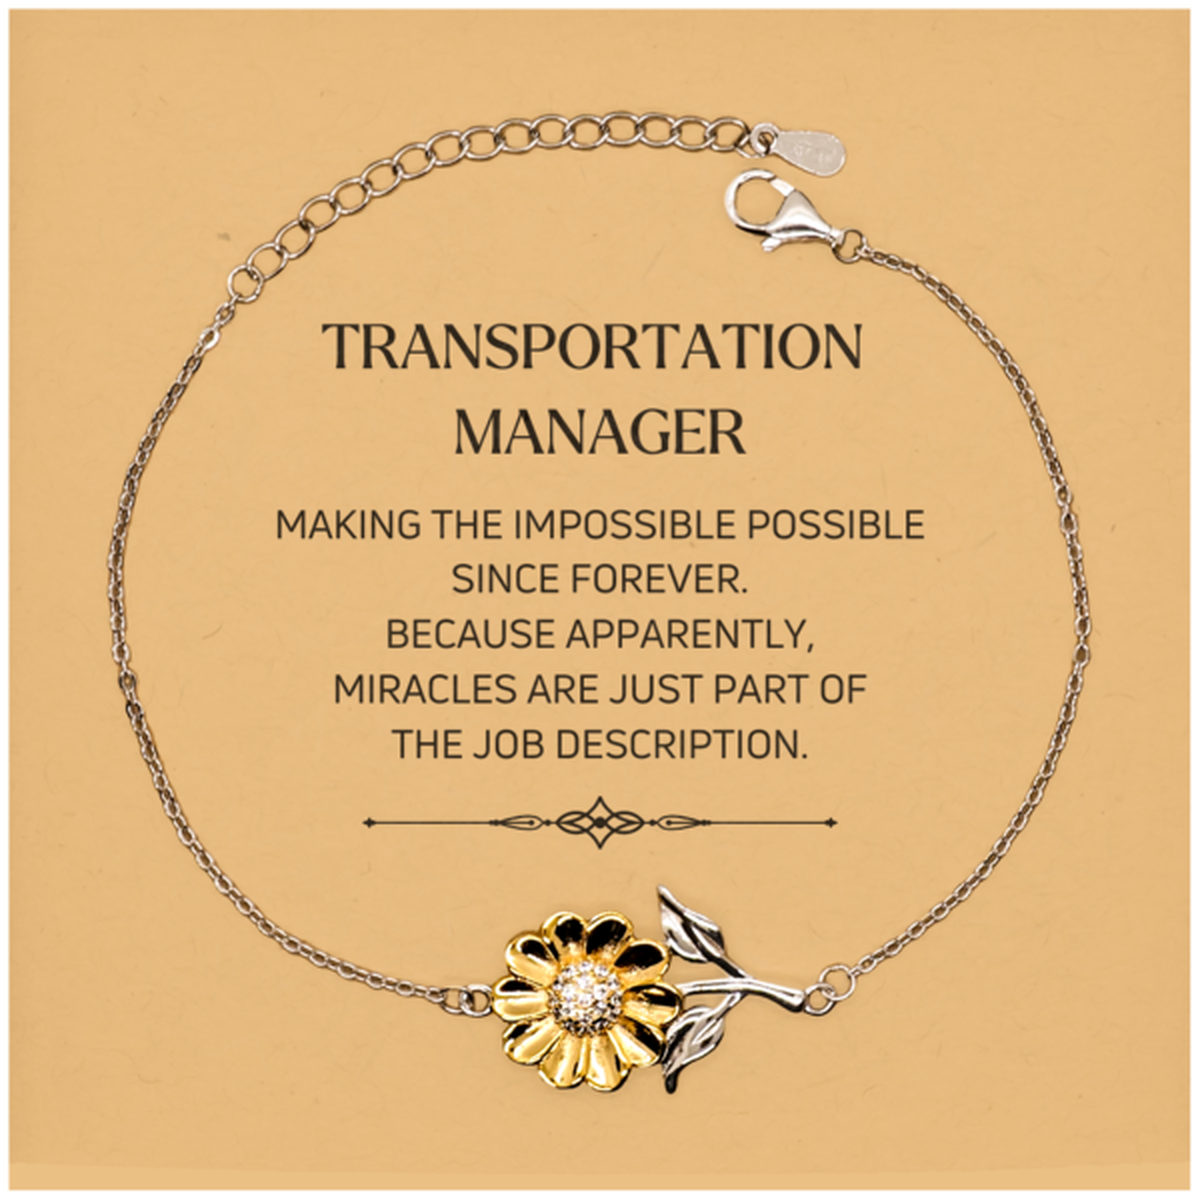 Funny Transportation Manager Gifts, Miracles are just part of the job description, Inspirational Birthday Christmas Sunflower Bracelet For Transportation Manager, Men, Women, Coworkers, Friends, Boss